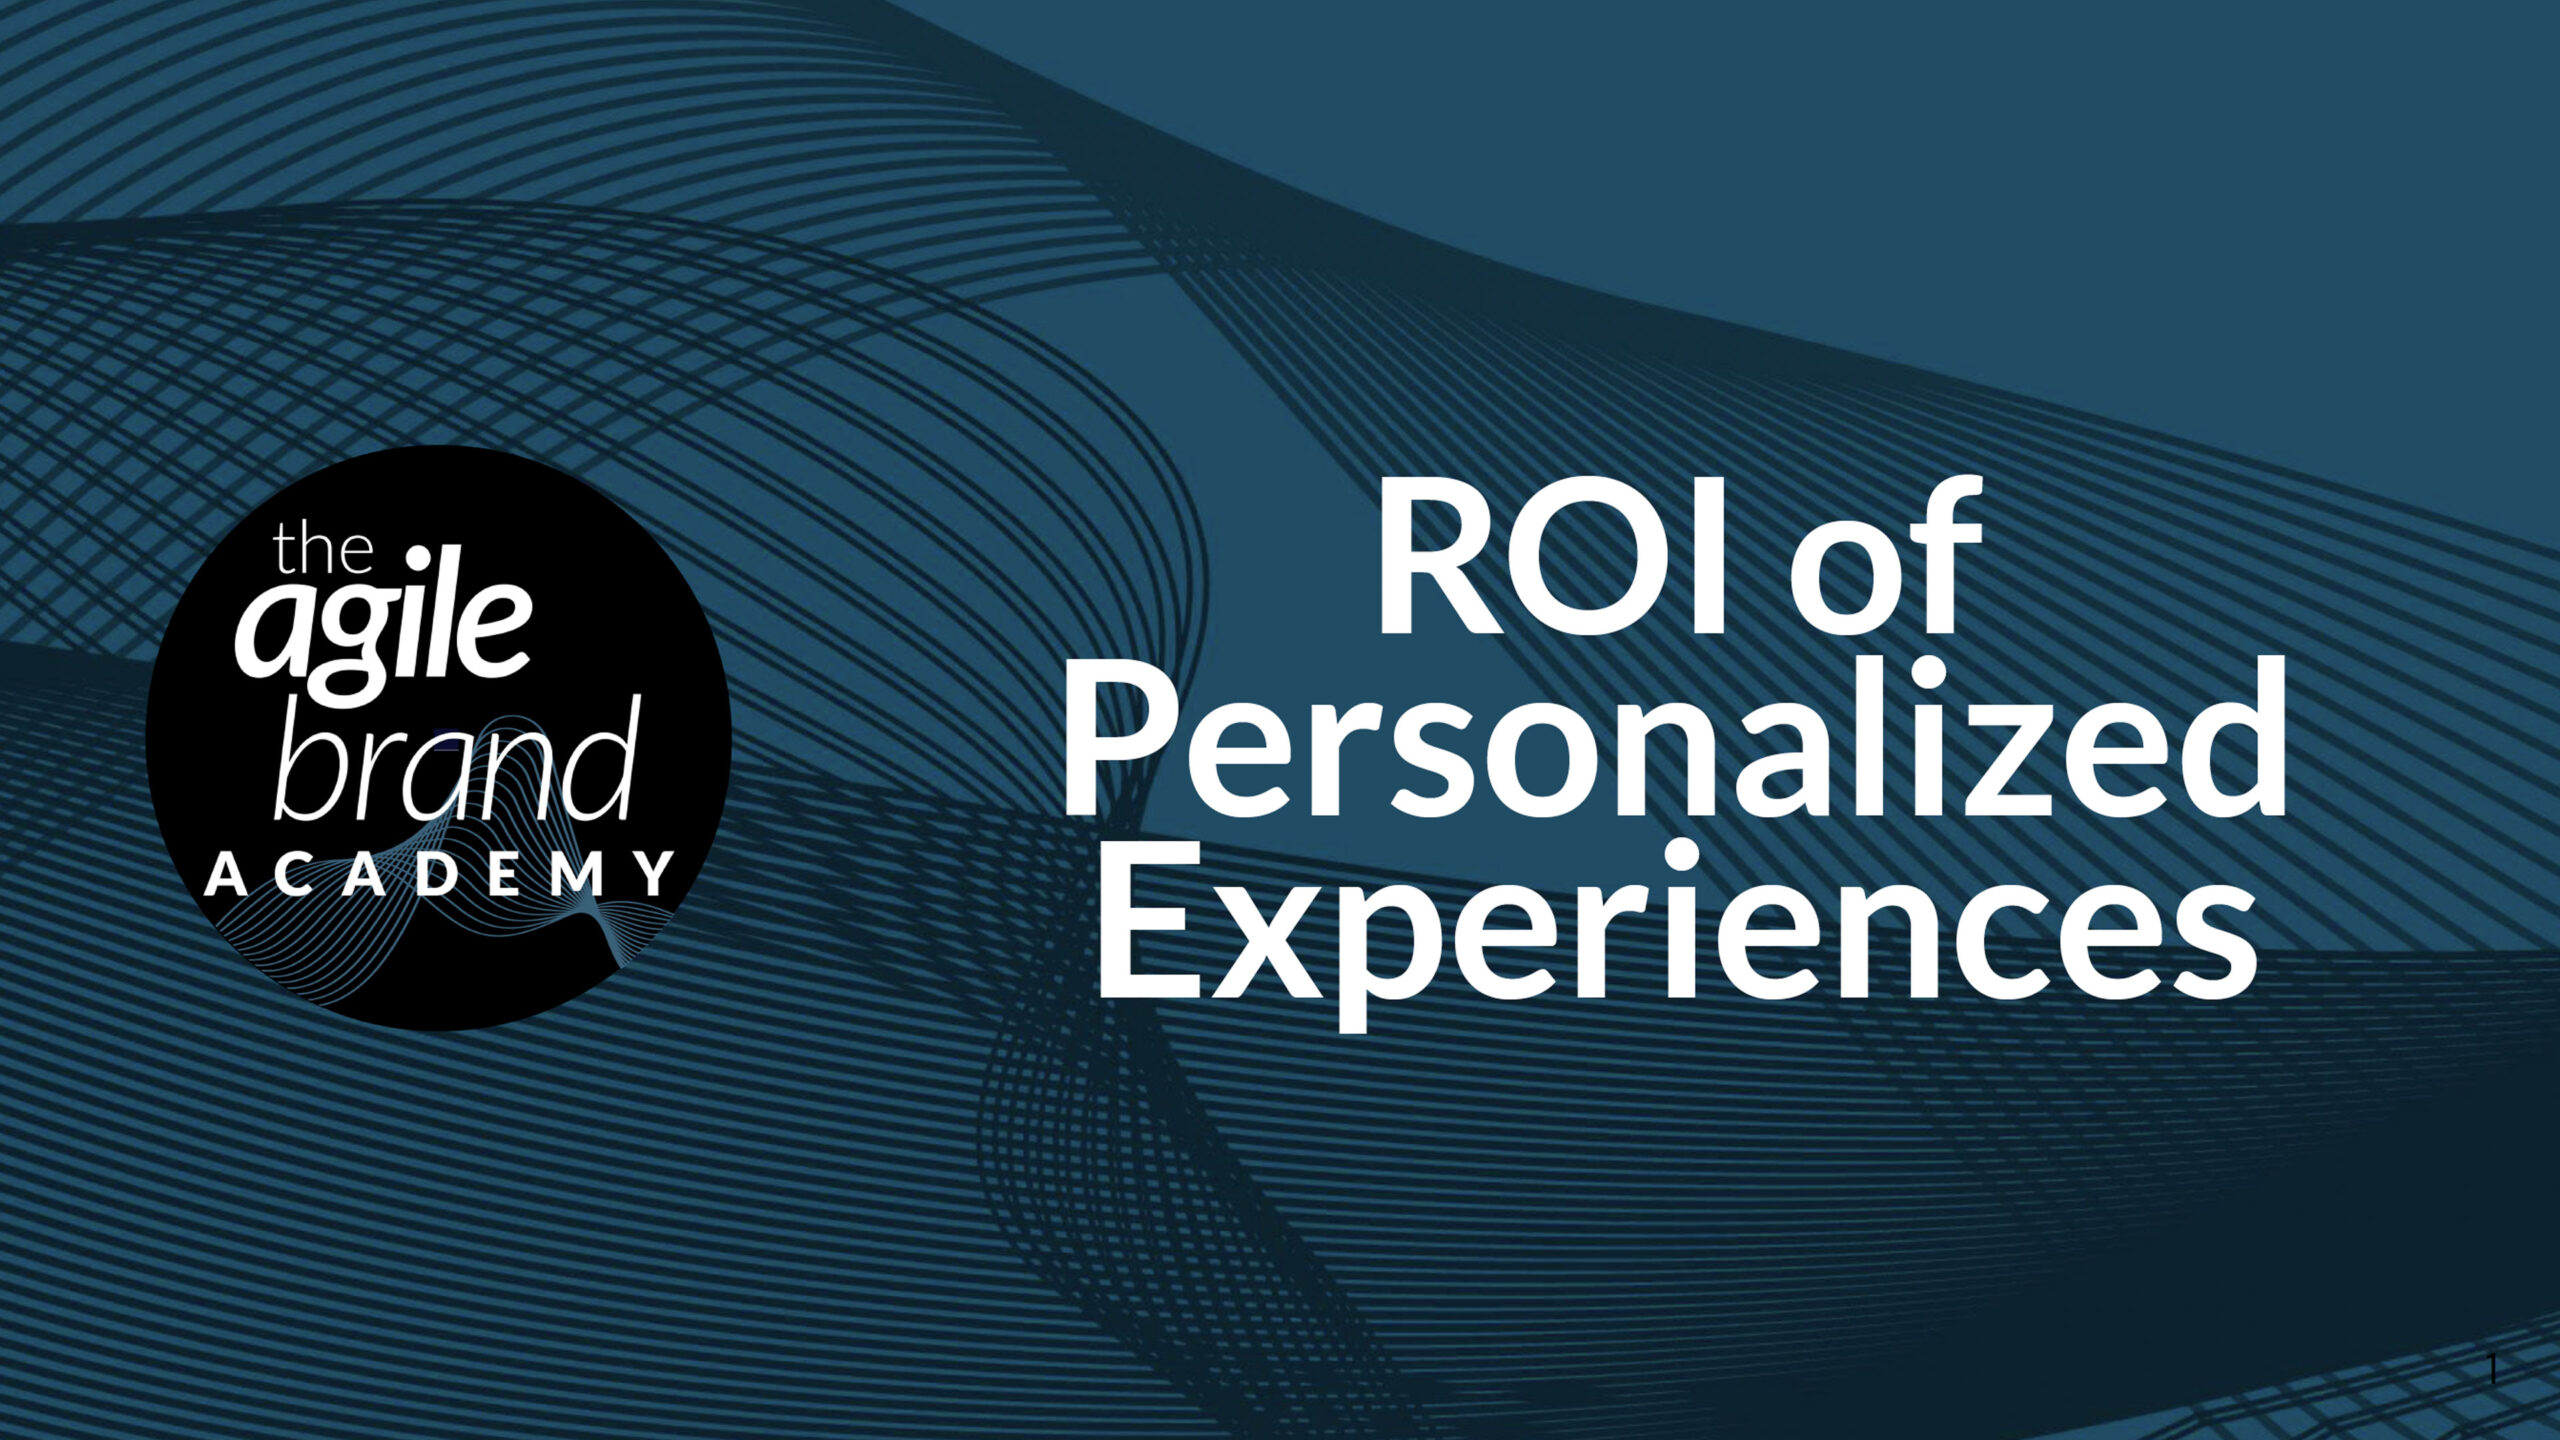 ROI of Personalized Experiences